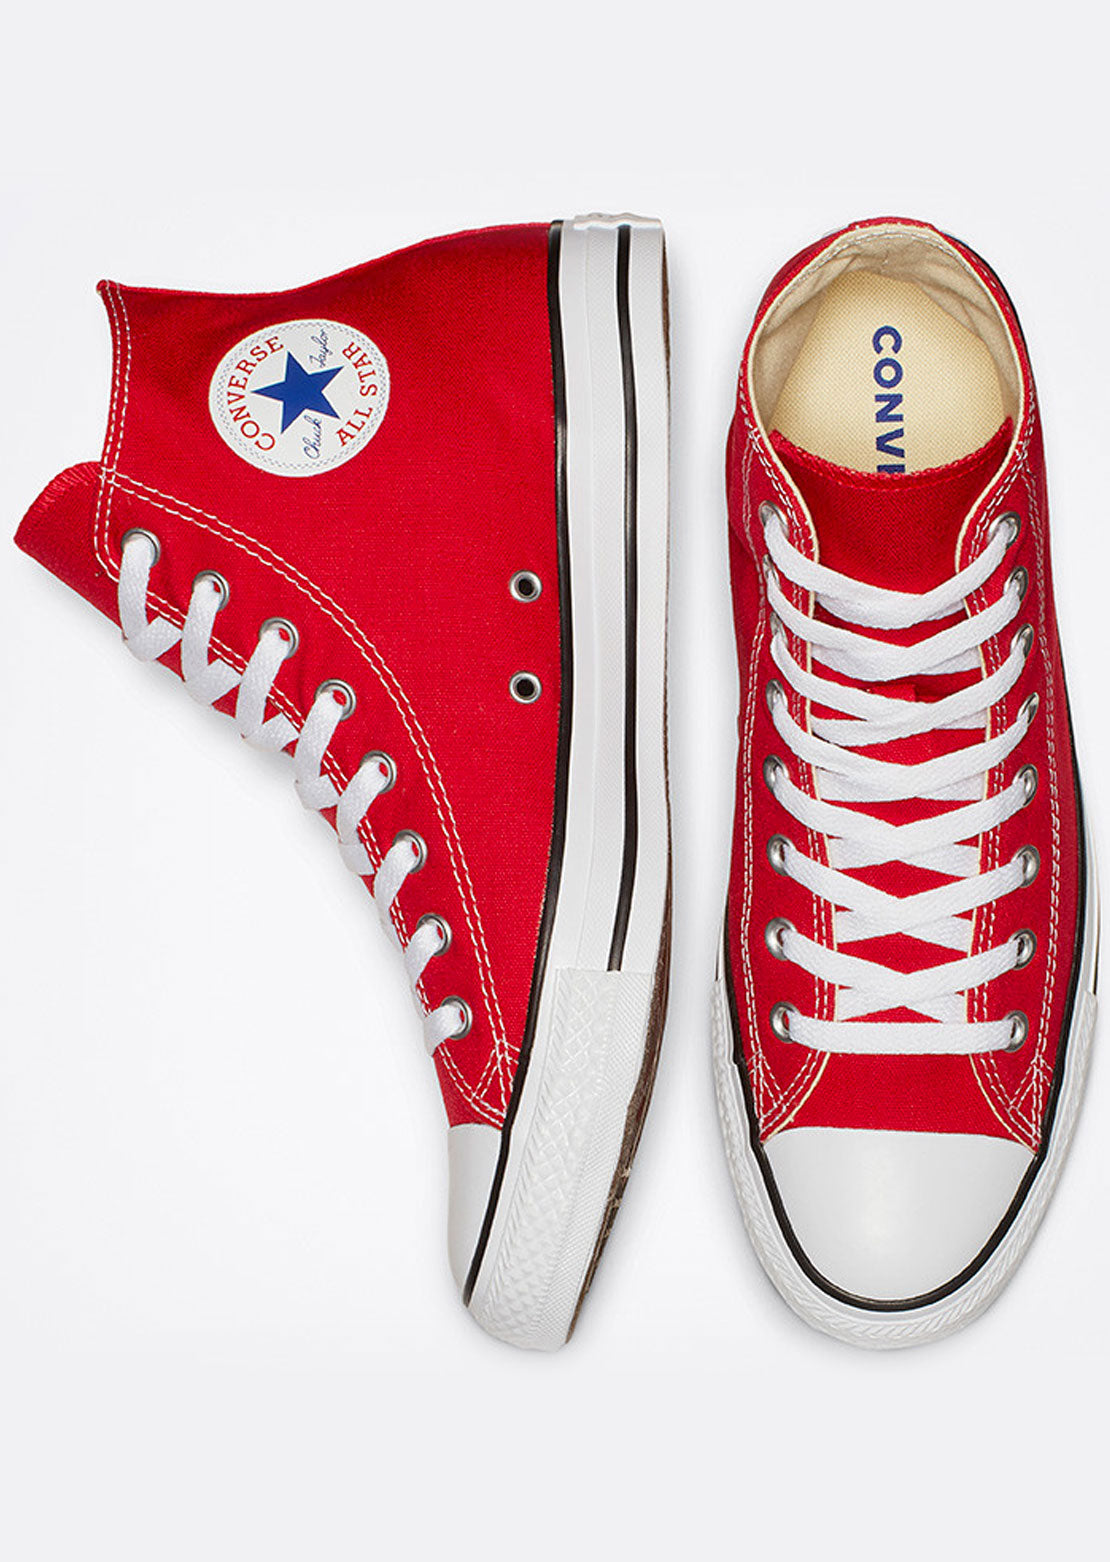 Converse Unisex Chuck Taylor All Star Hi Top Shoes Red